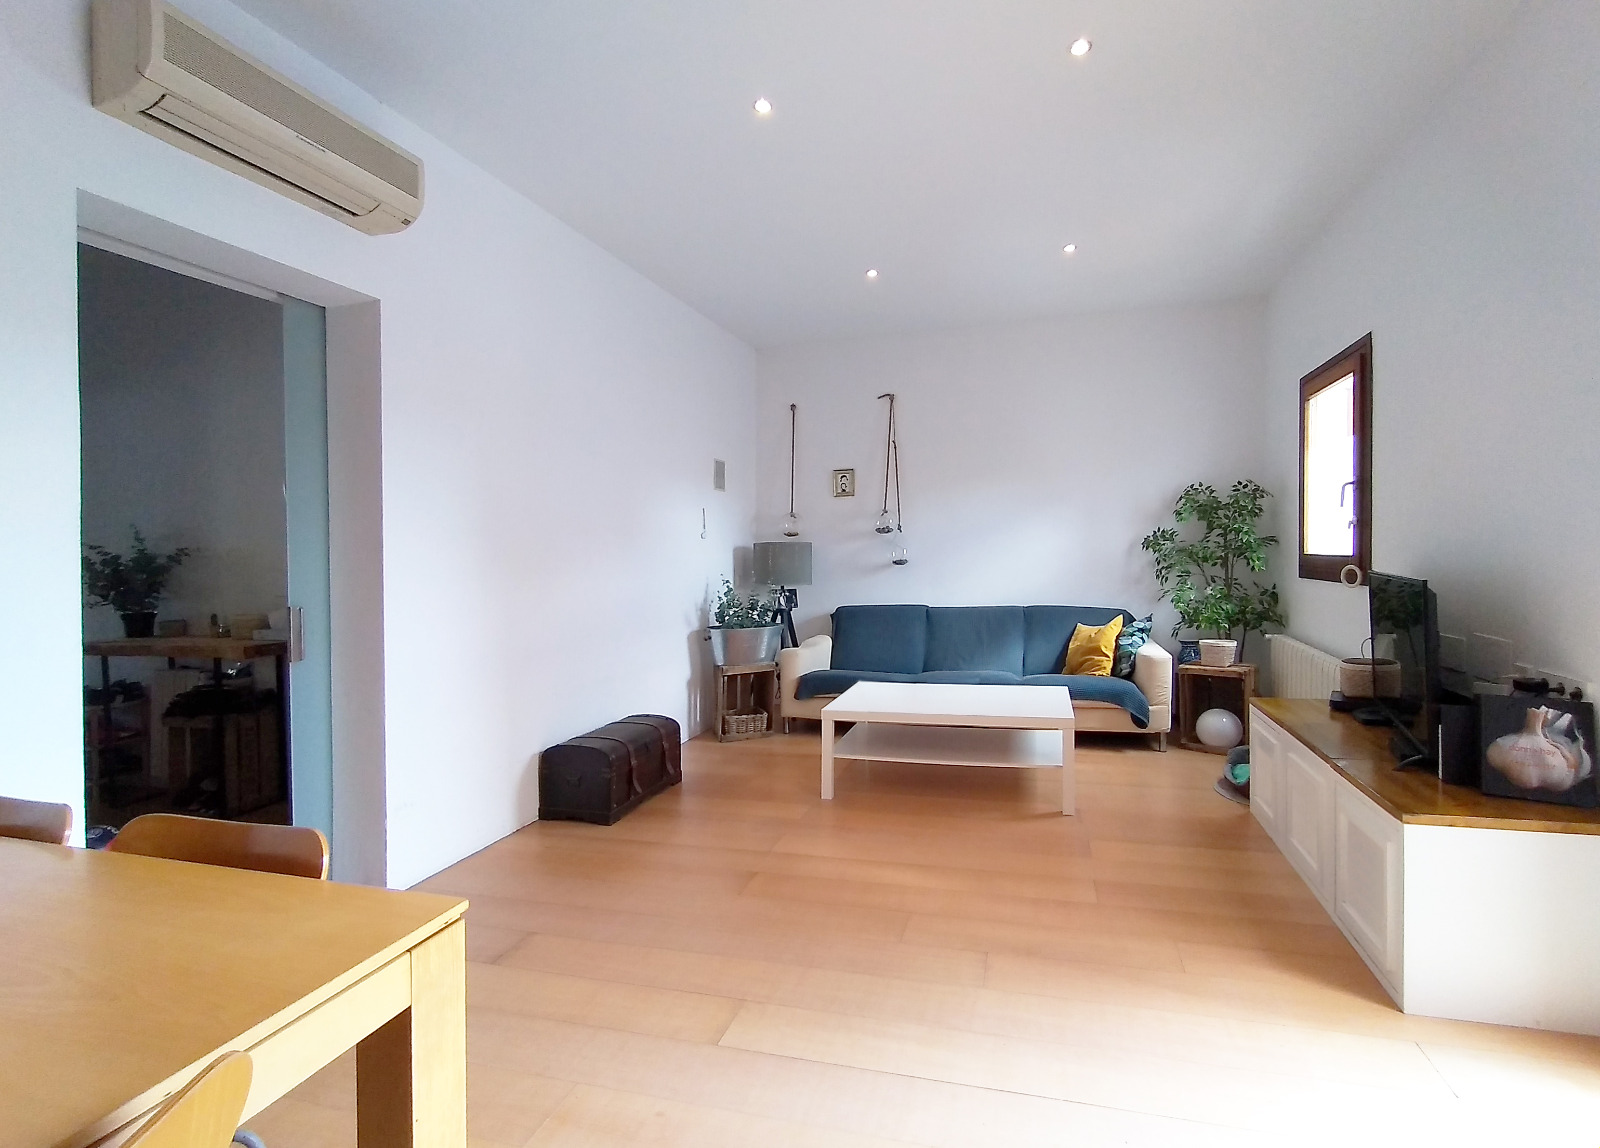 Superbly refurbished 3 bedroom apartment in the center of Palma